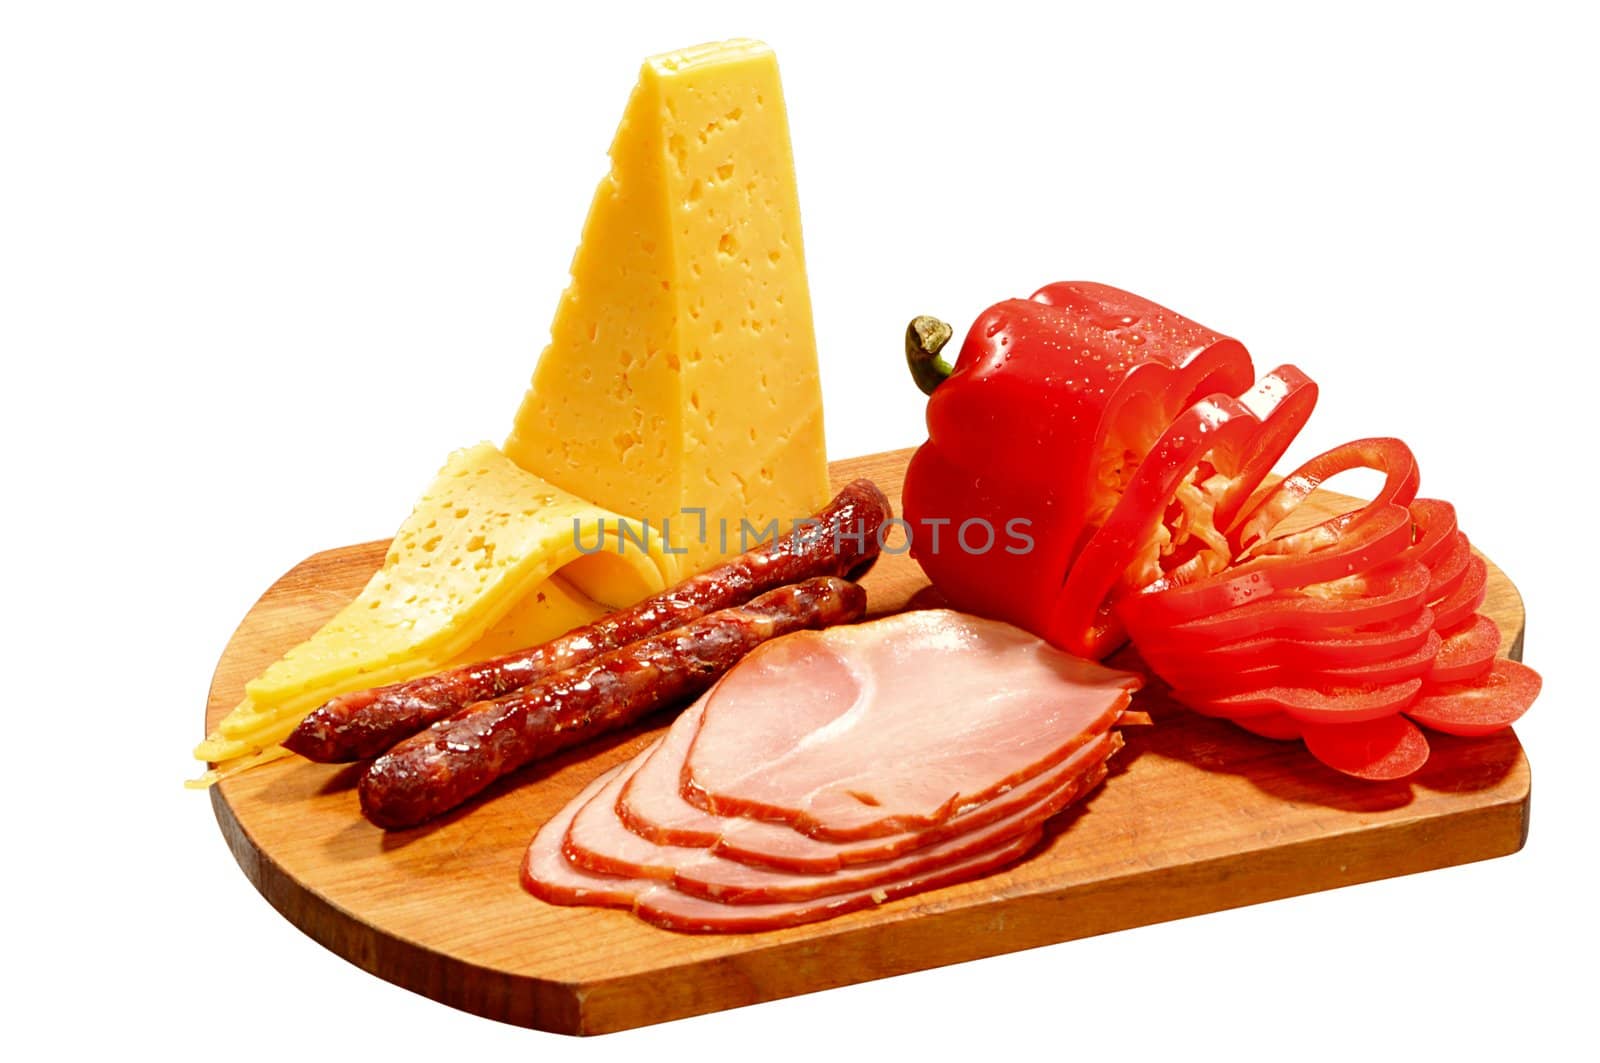 ingredients for preparation of home pizza